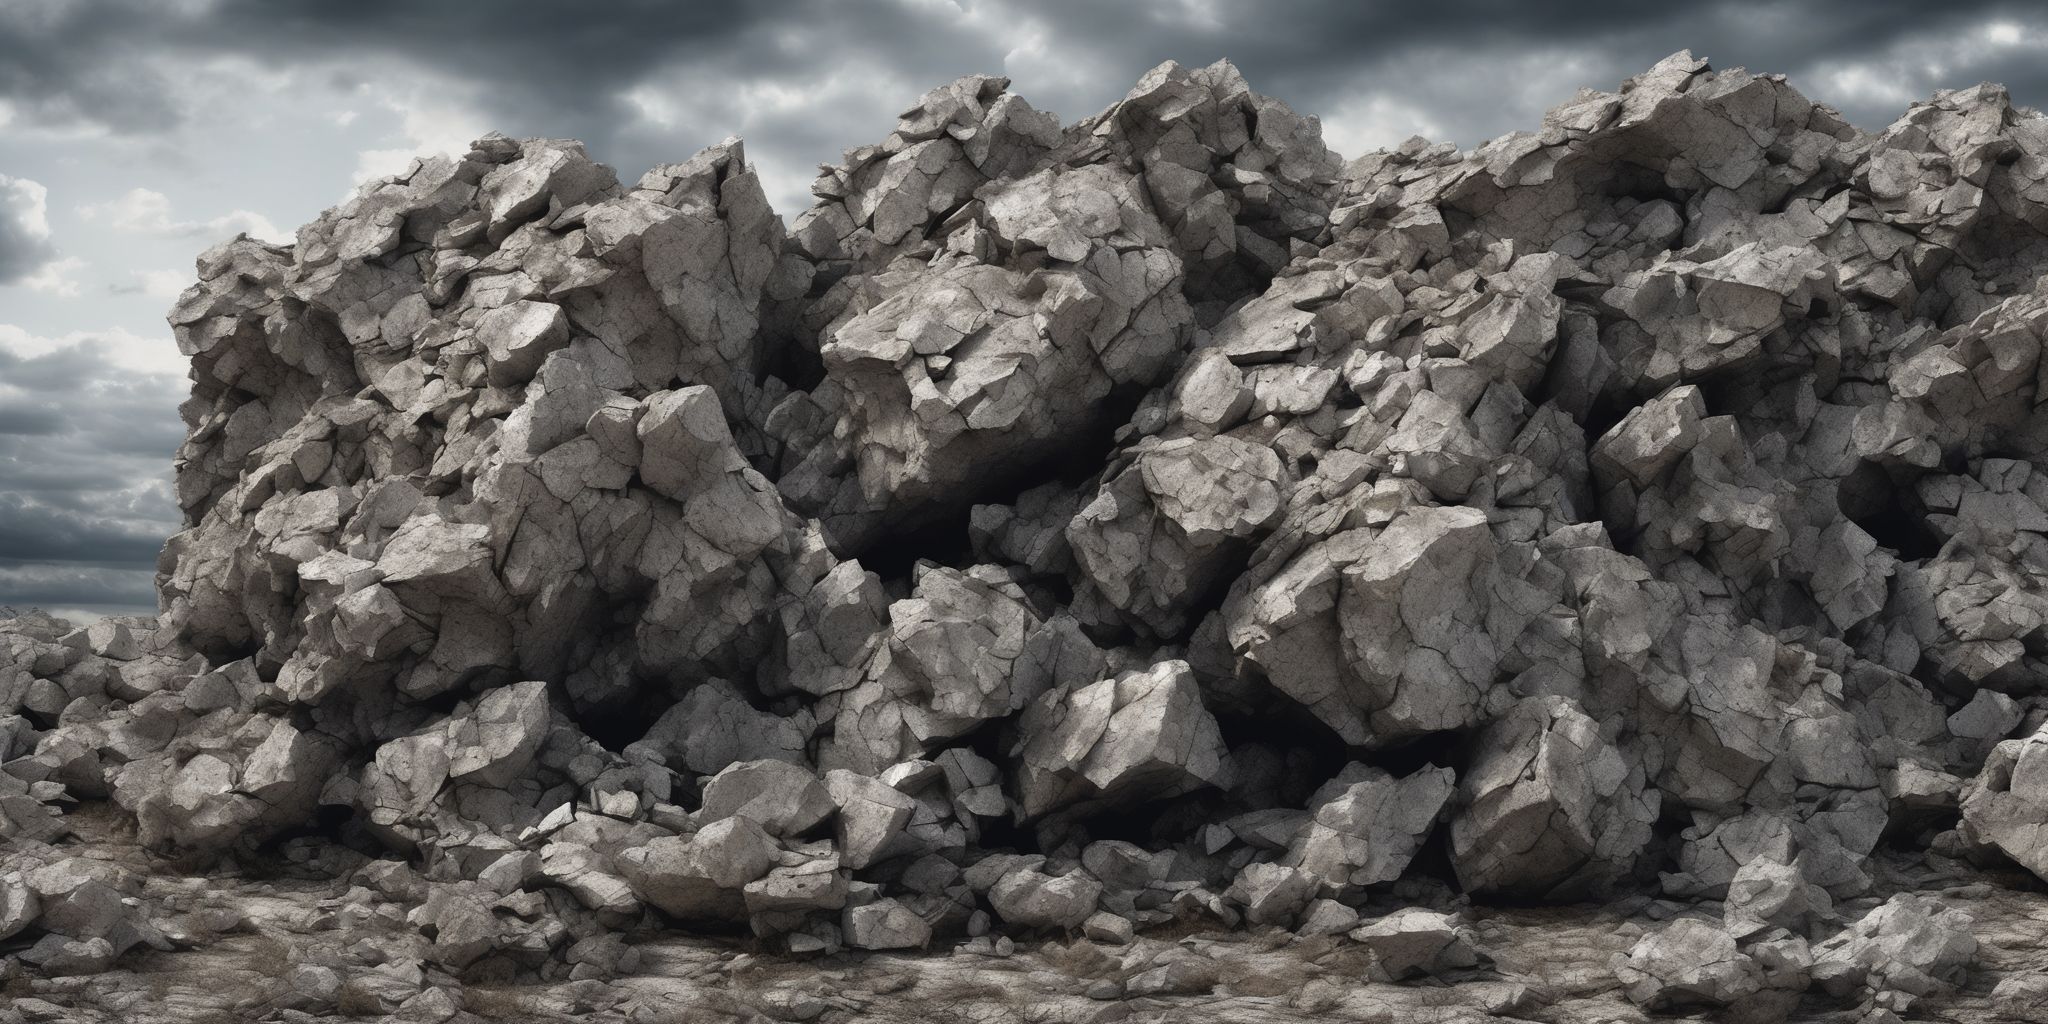 Crumbling rock  in realistic, photographic style